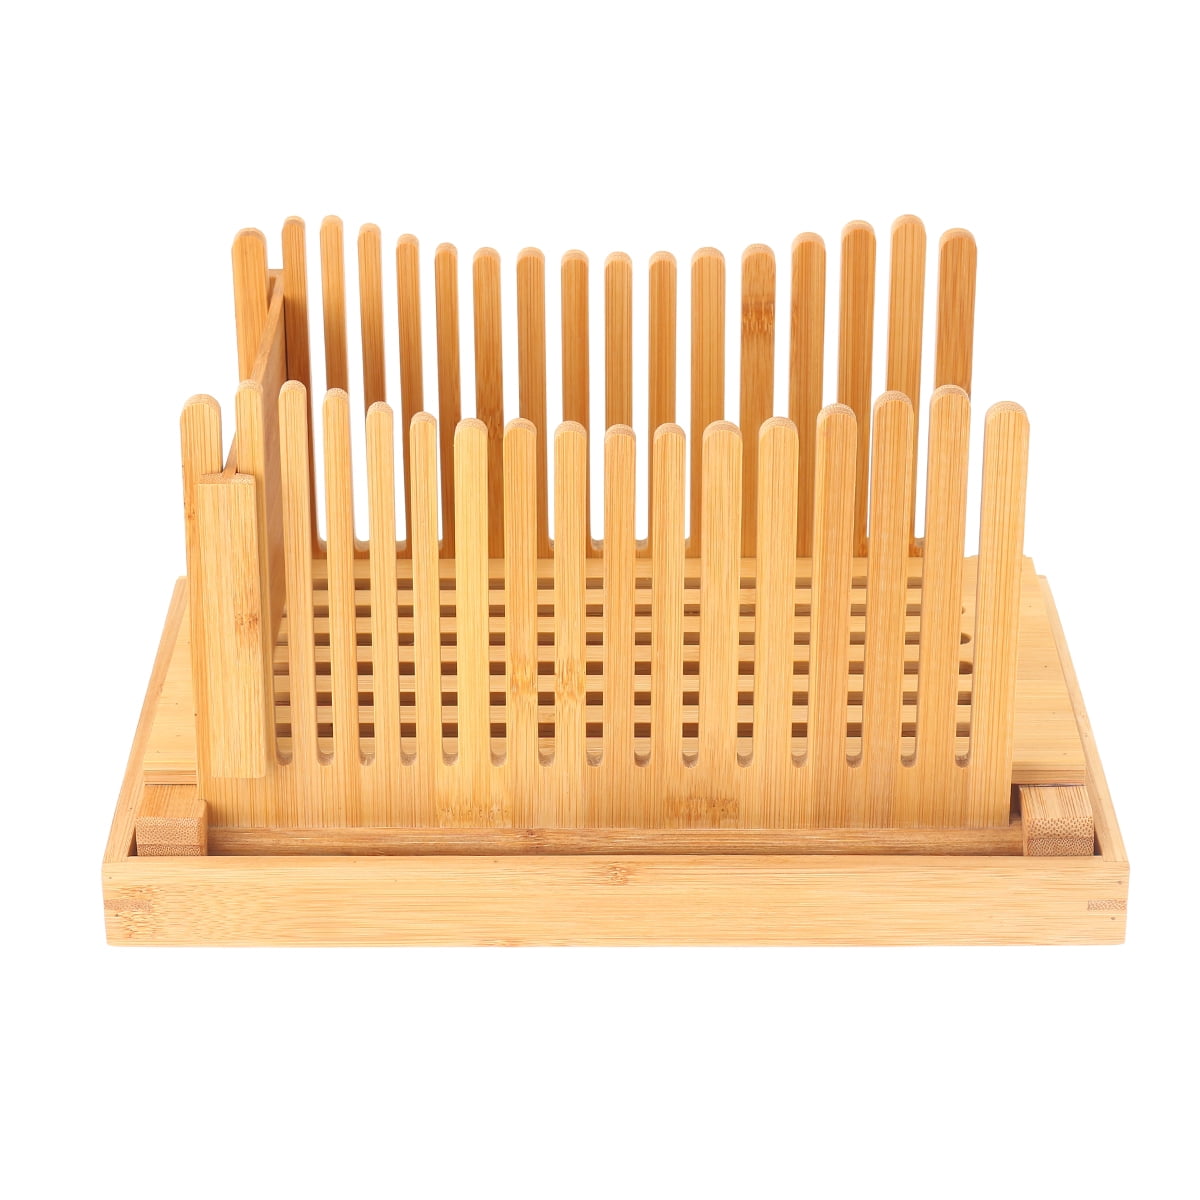 A Home Bamboo Bread Slicer For Homemade Bread Loaf – Wooden Bread Cutting  Board With Crumble Holder